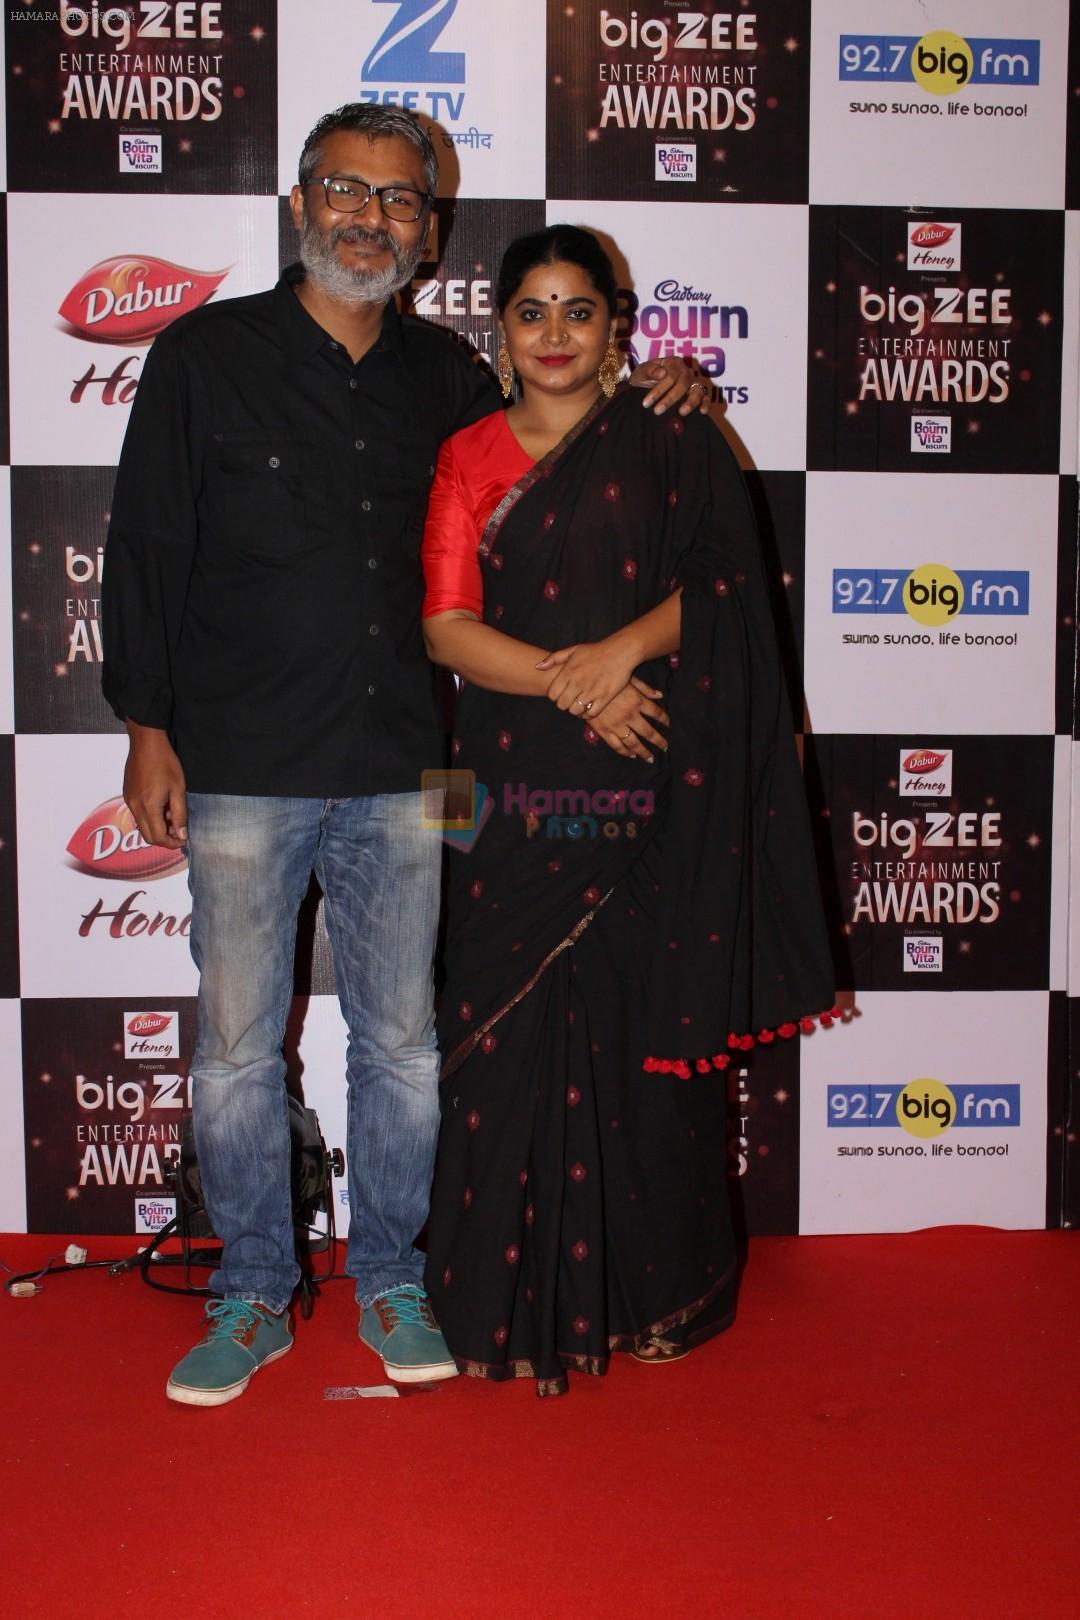 At Red Carpet Of Big Zee Entertainment Awards 2017 on 29th July 2017